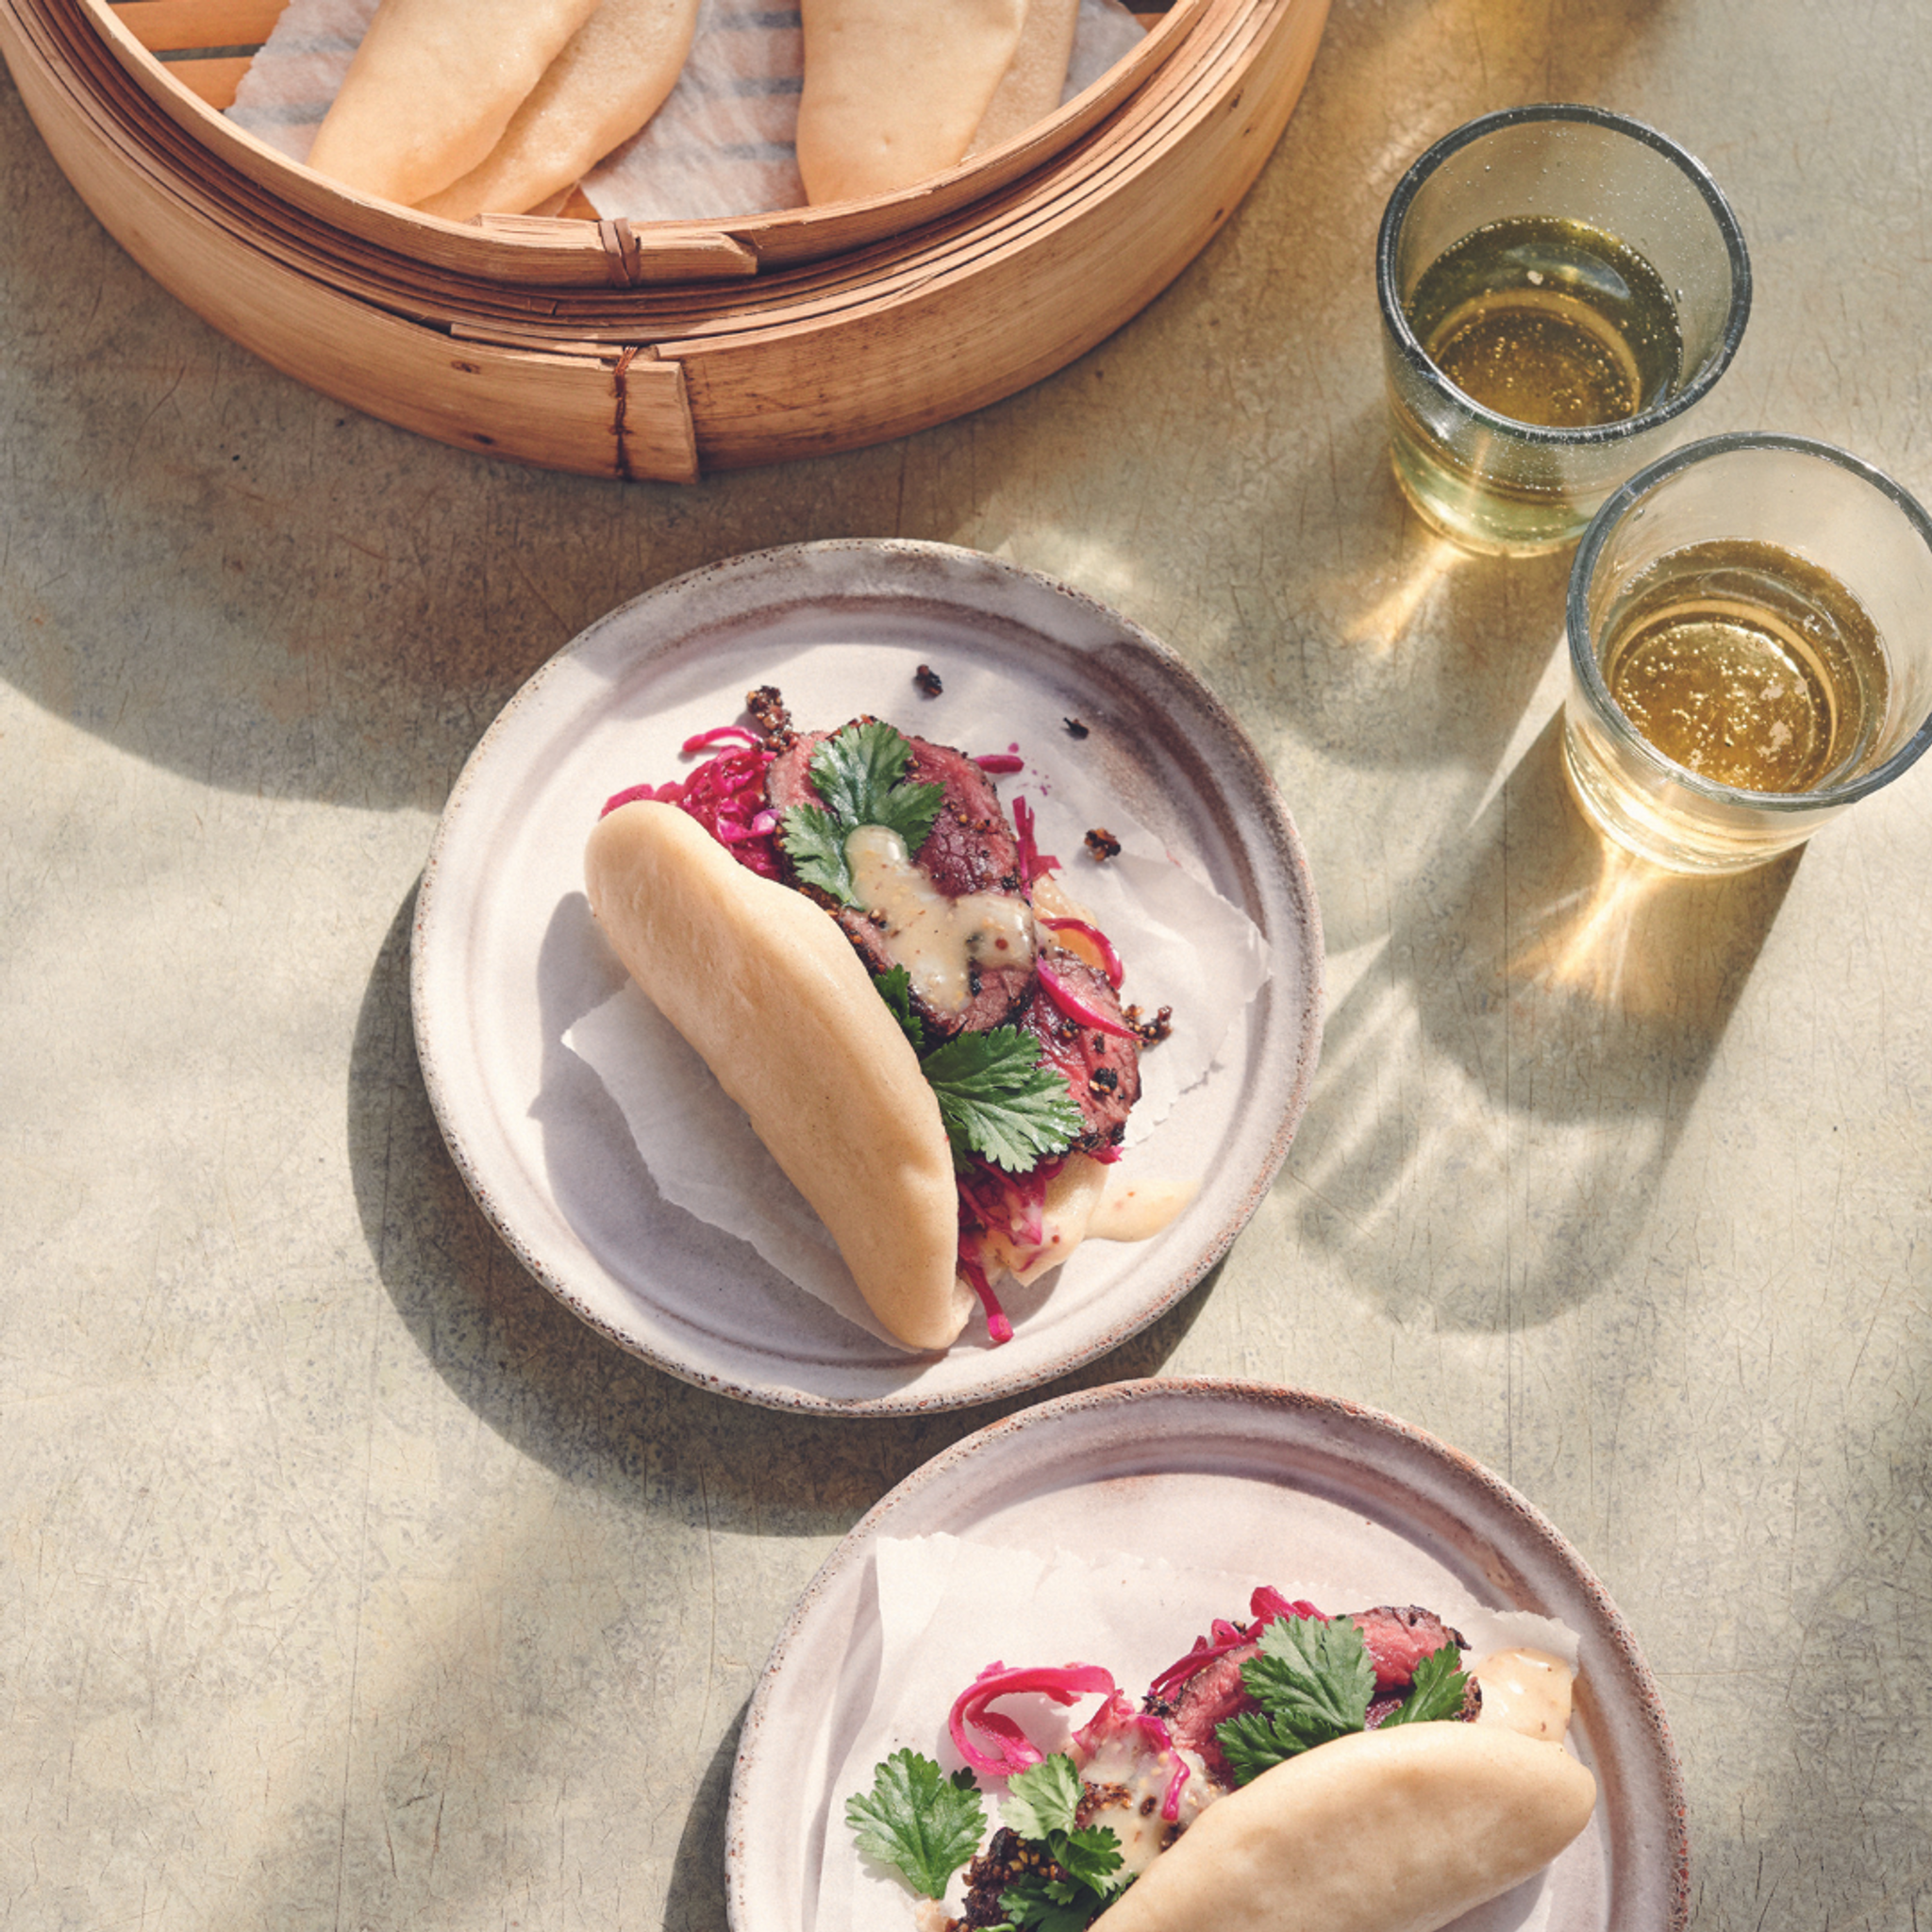 Venison bao buns recipe from Marcus' Kitchen by Marcus Wareing